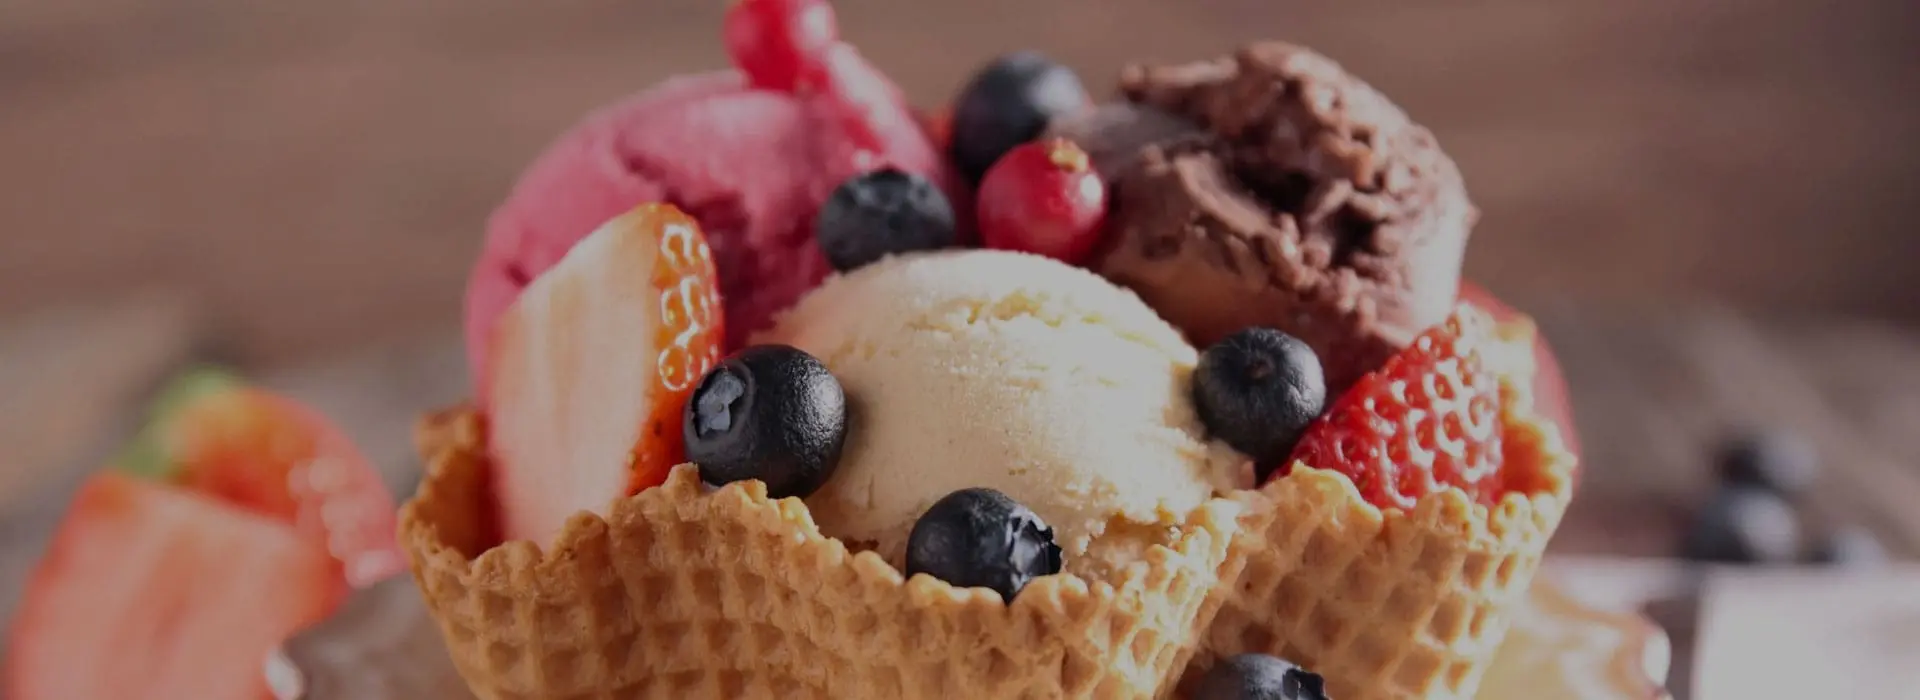 A close up of ice cream and fruit